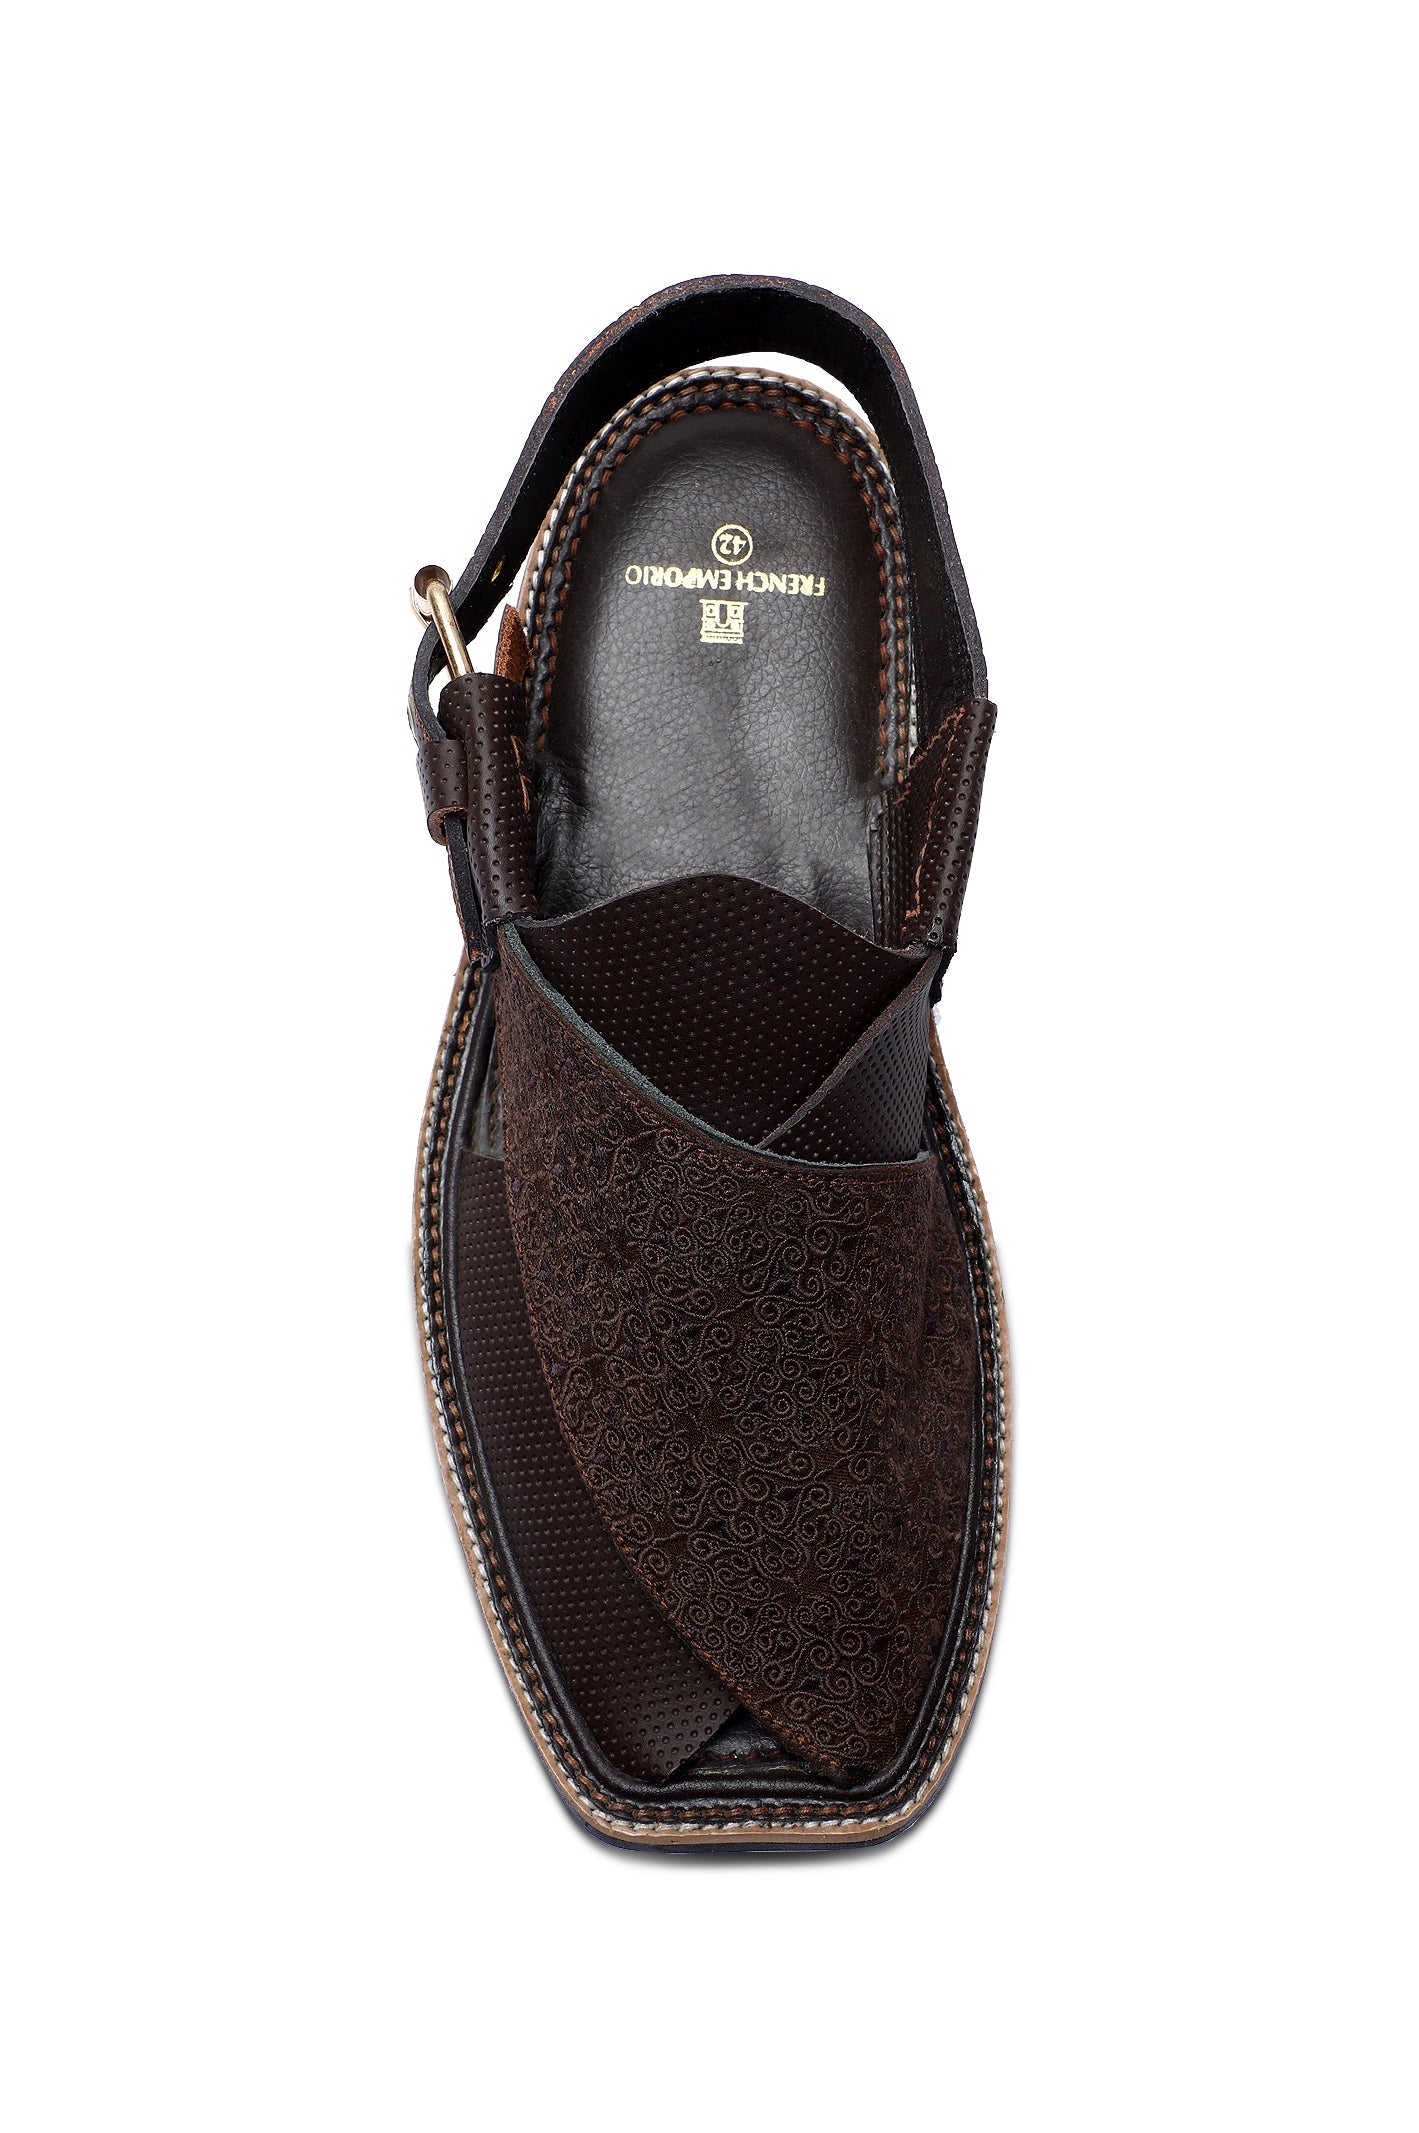 French Emporio Men's Sandal SKU: PSLD-0031-COFFEE - Diners